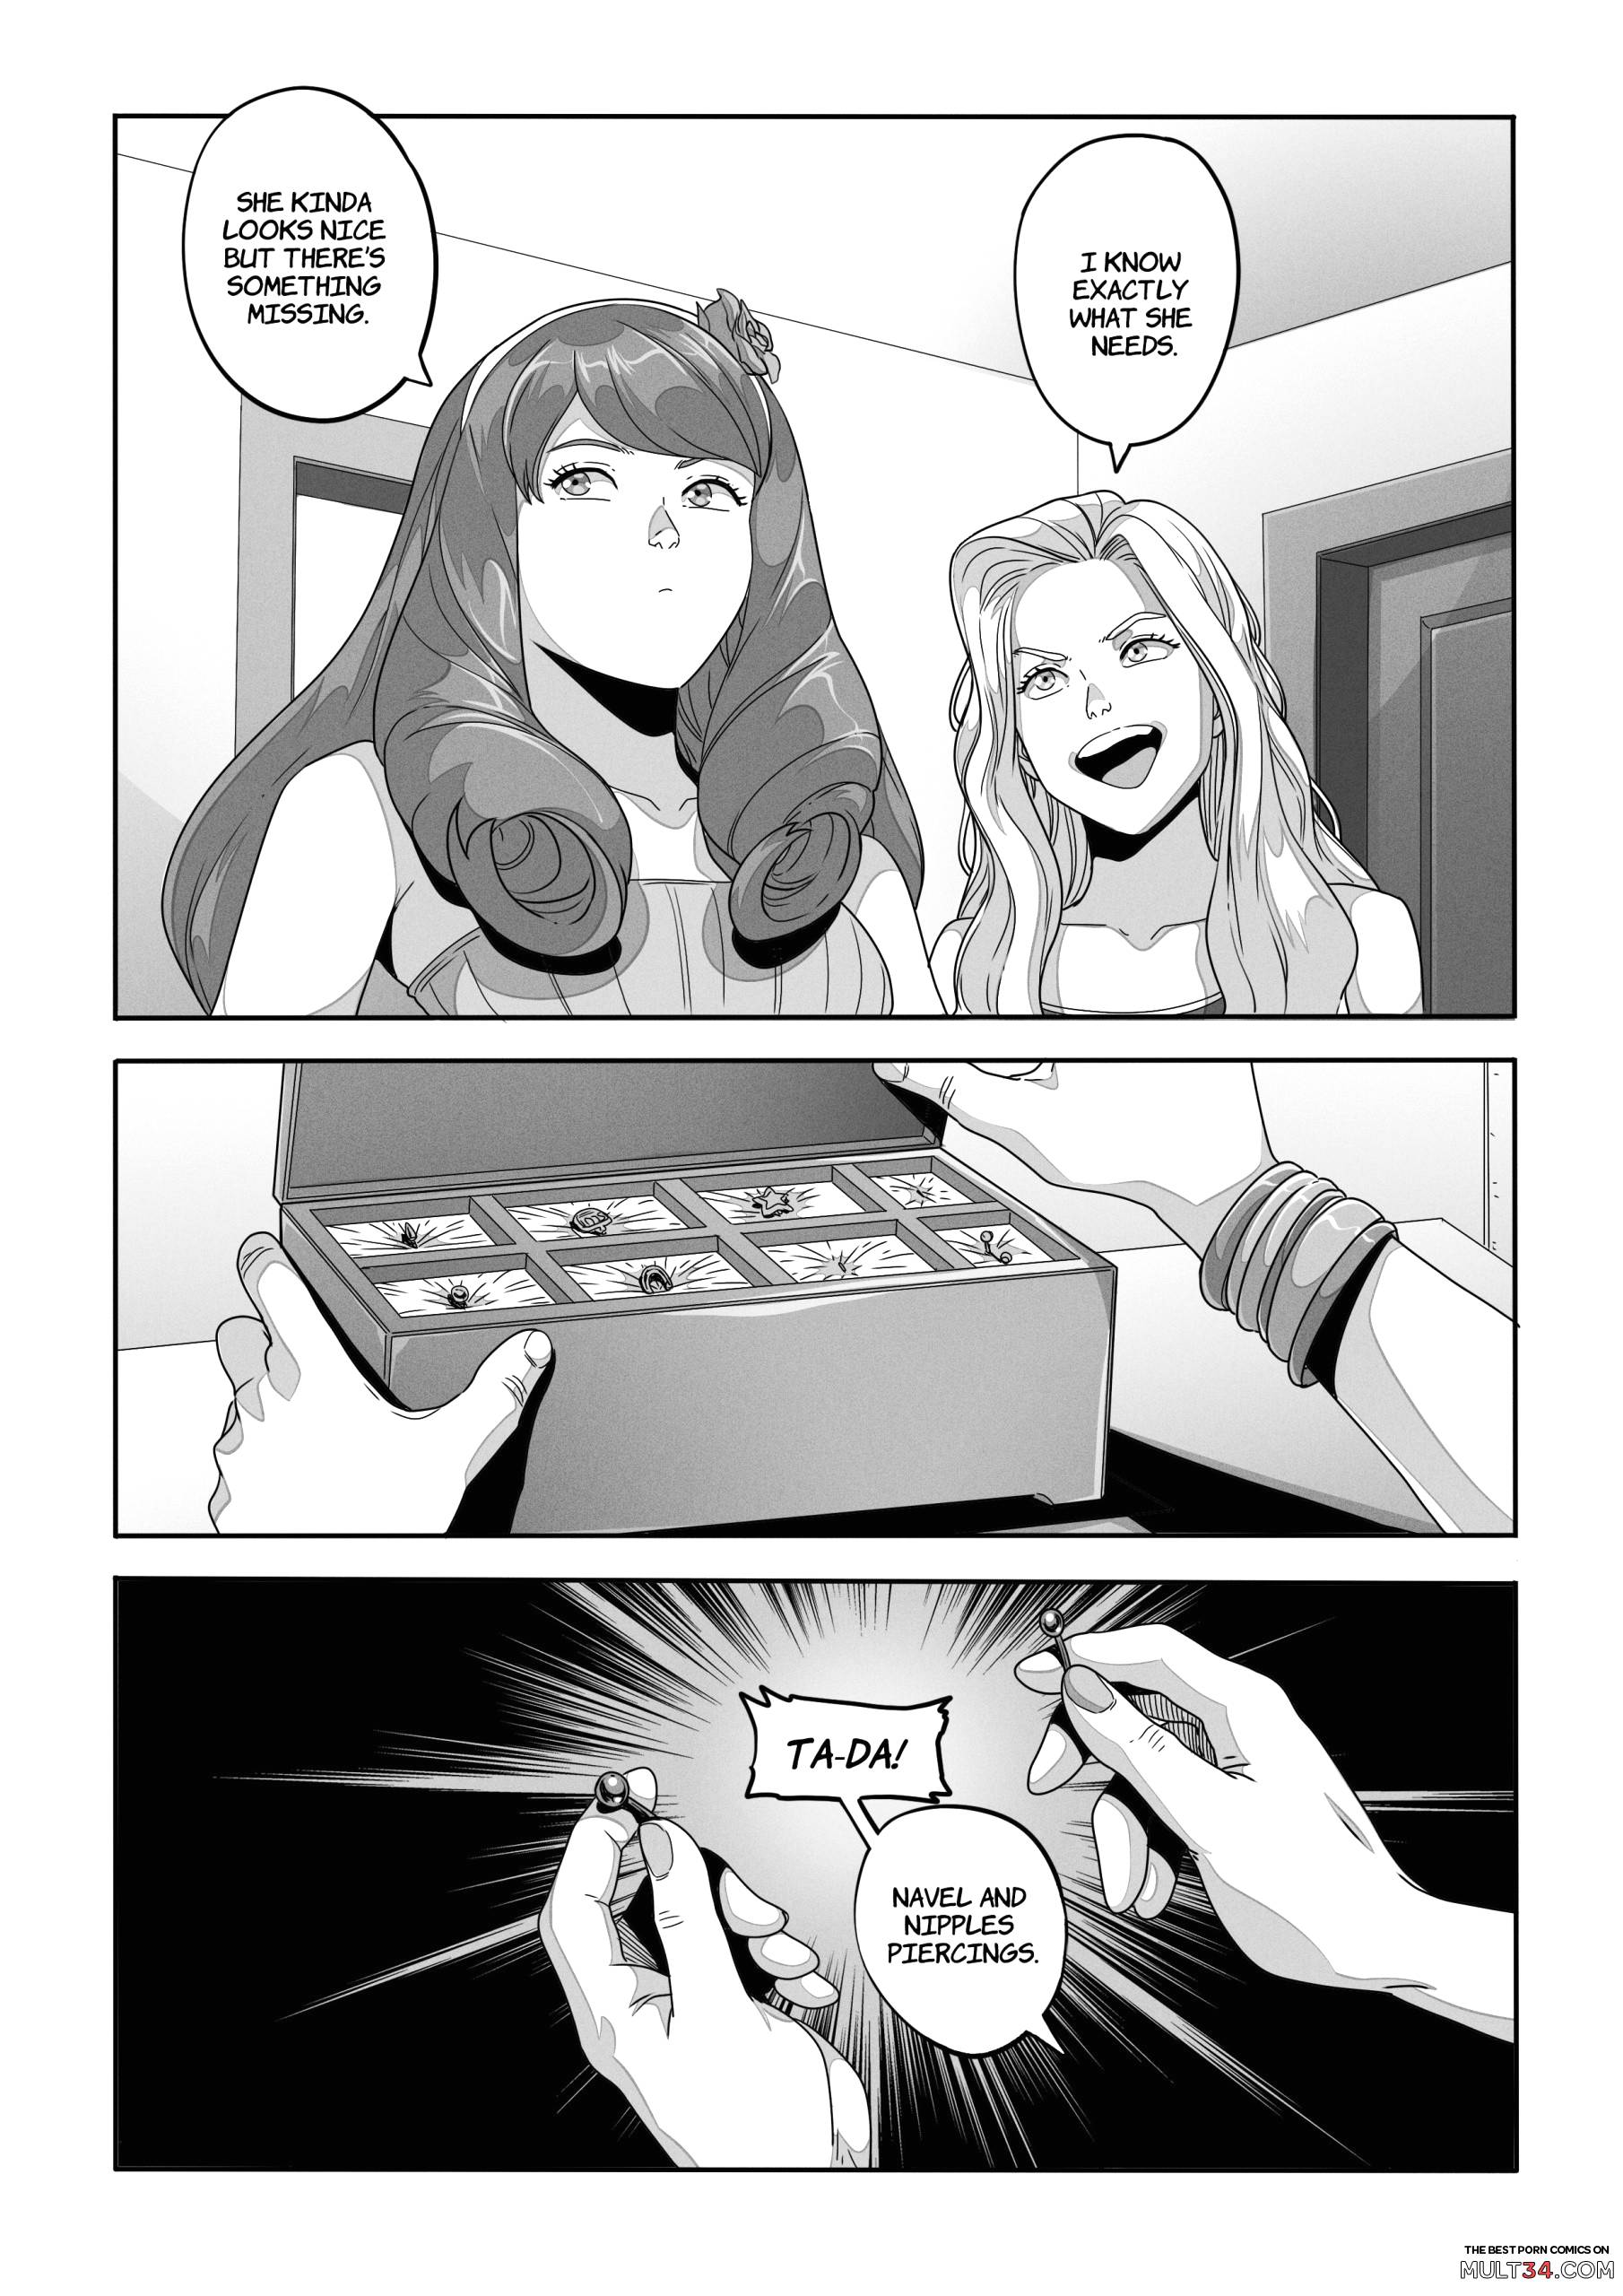 N.I.L.F. - Nerd I'd Like To Fuck page 19